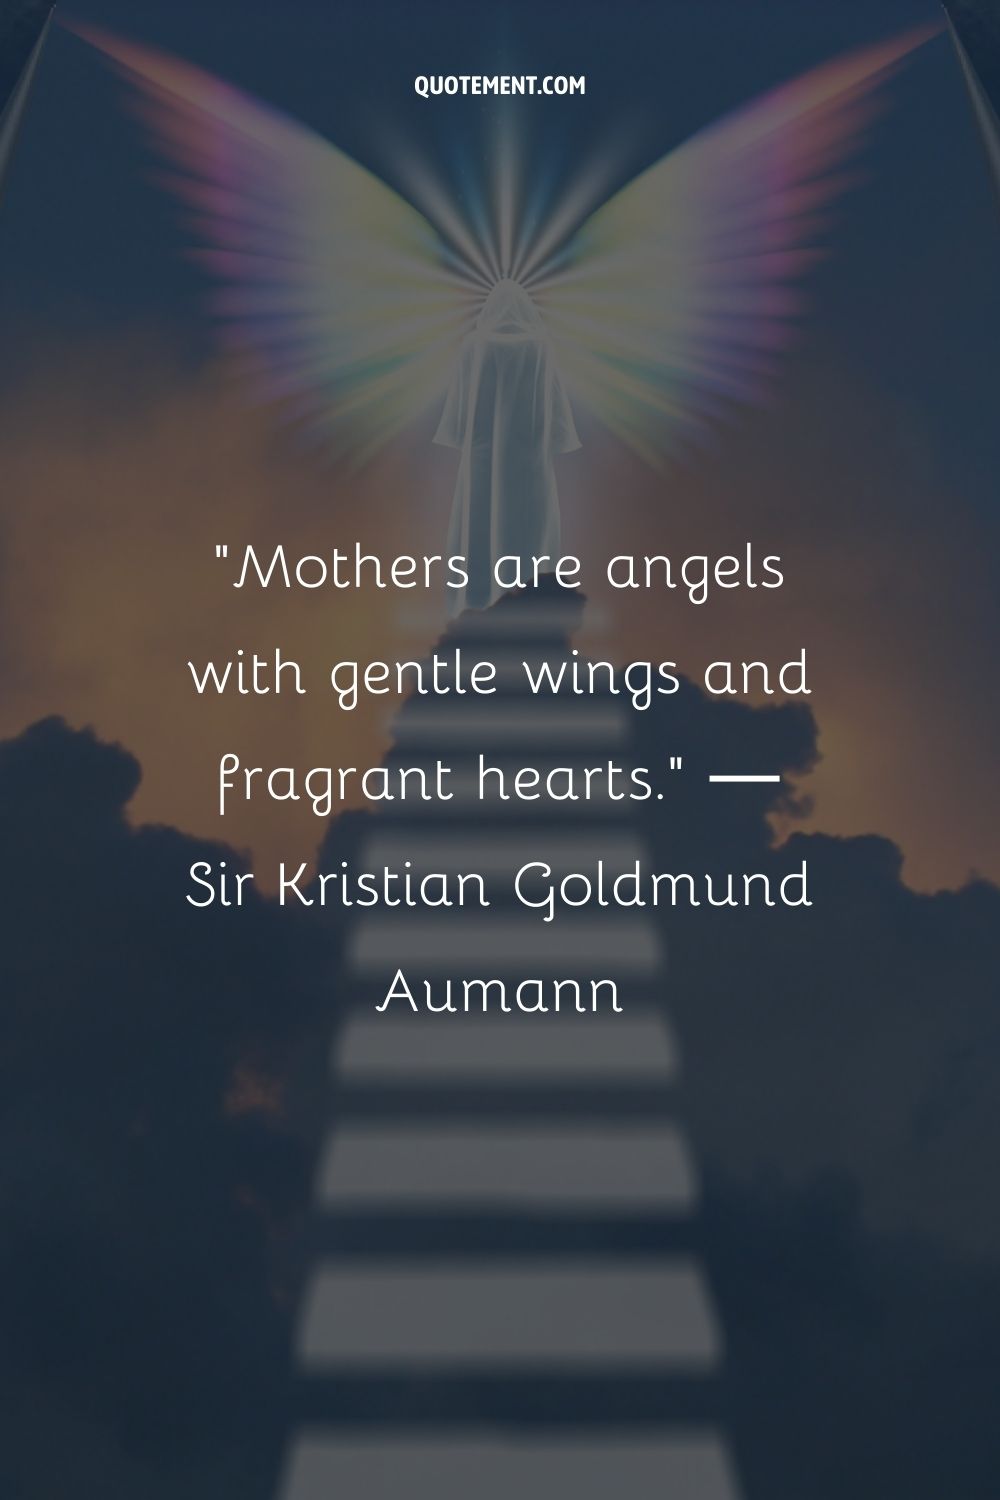 Mothers are angels with gentle wings and fragrant hearts.